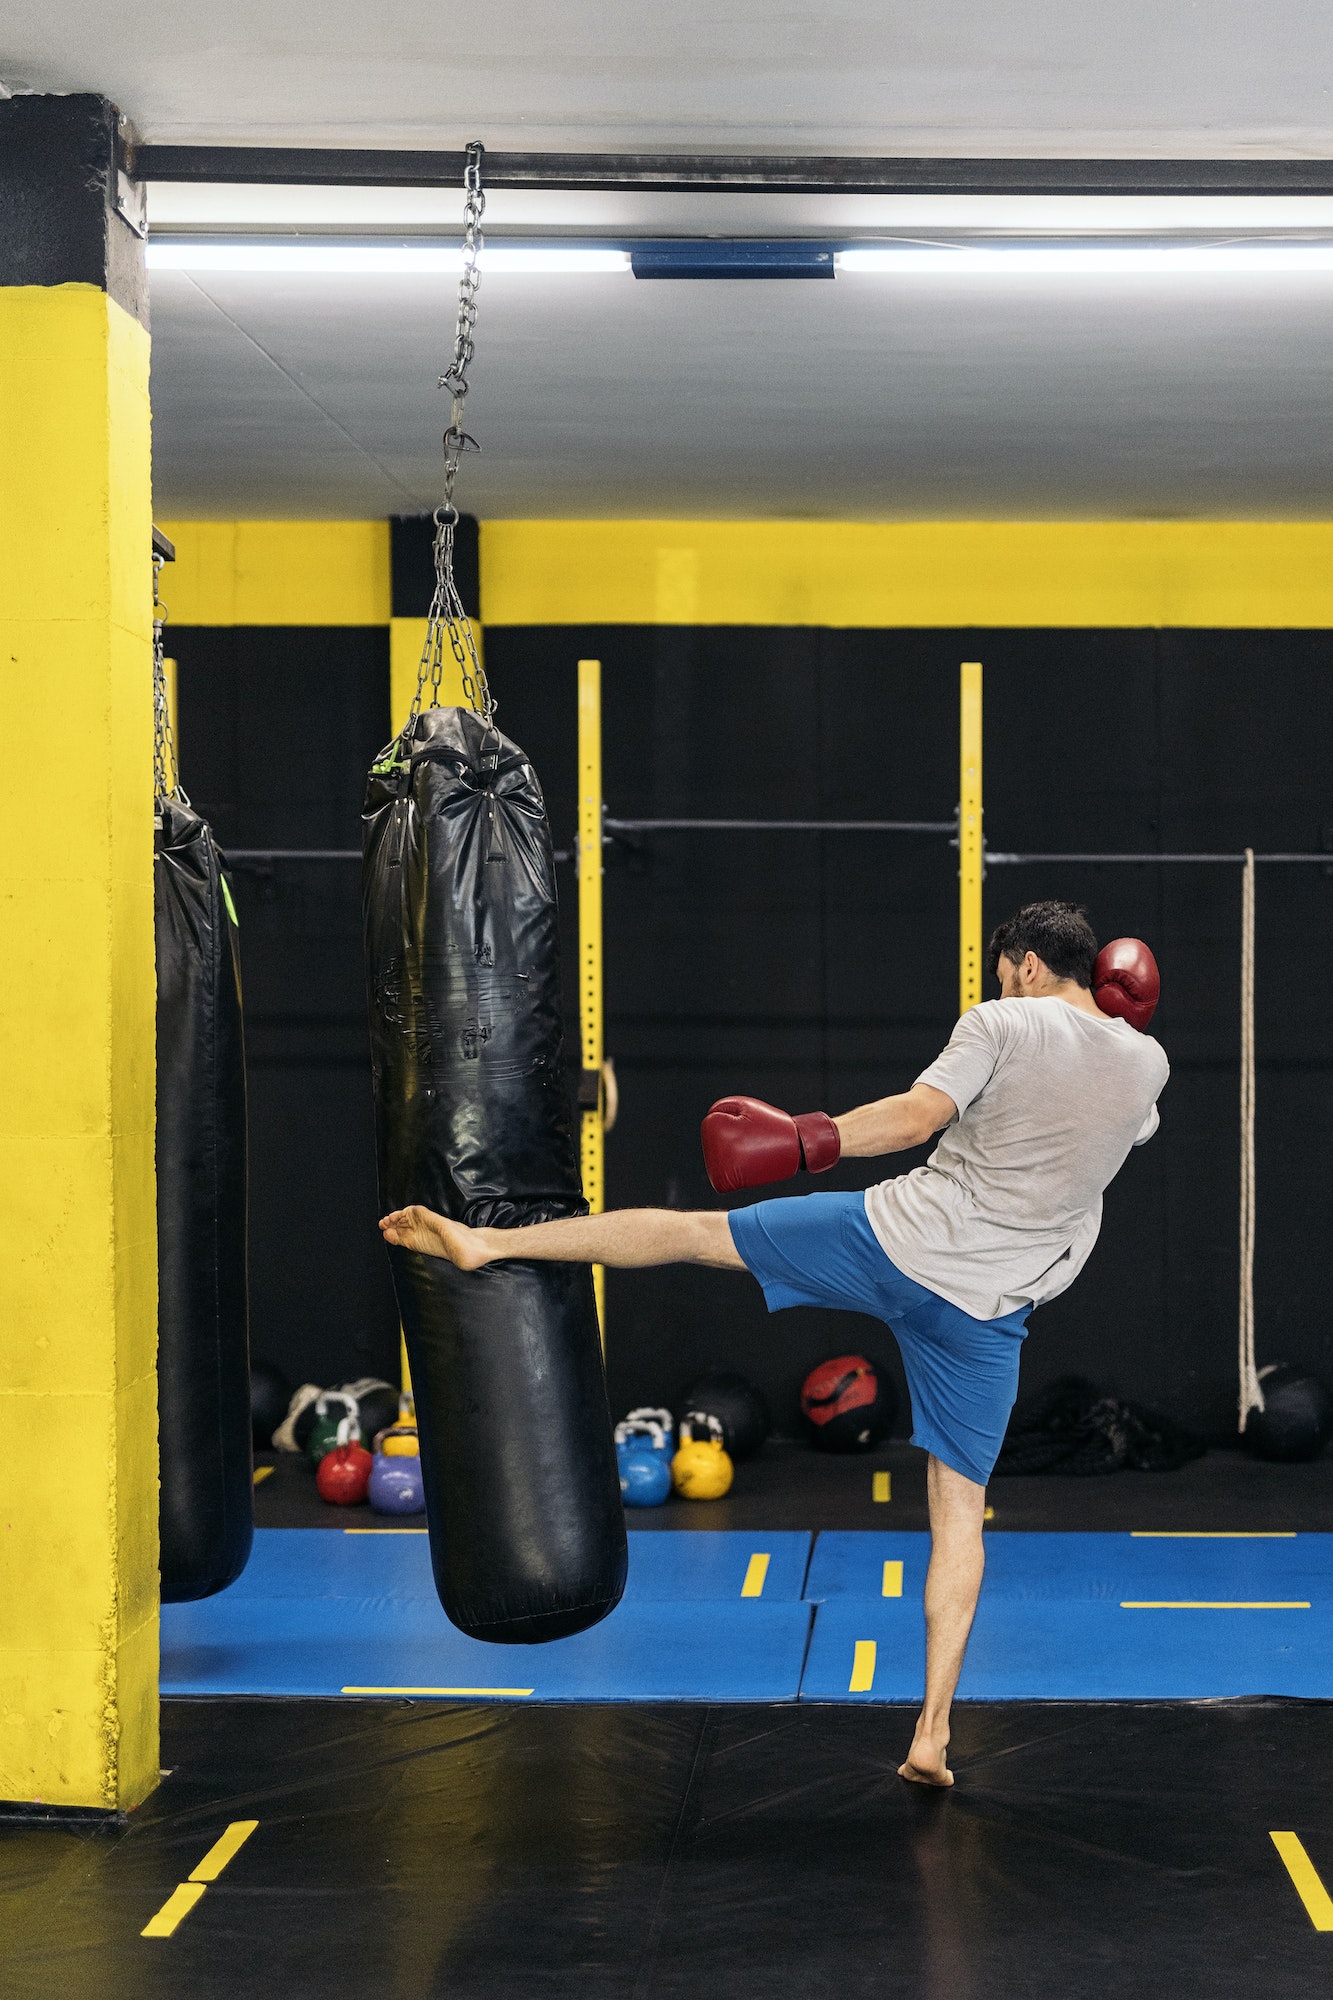 Kickboxing fighter performing Kicks with foot on punching bag at the gym